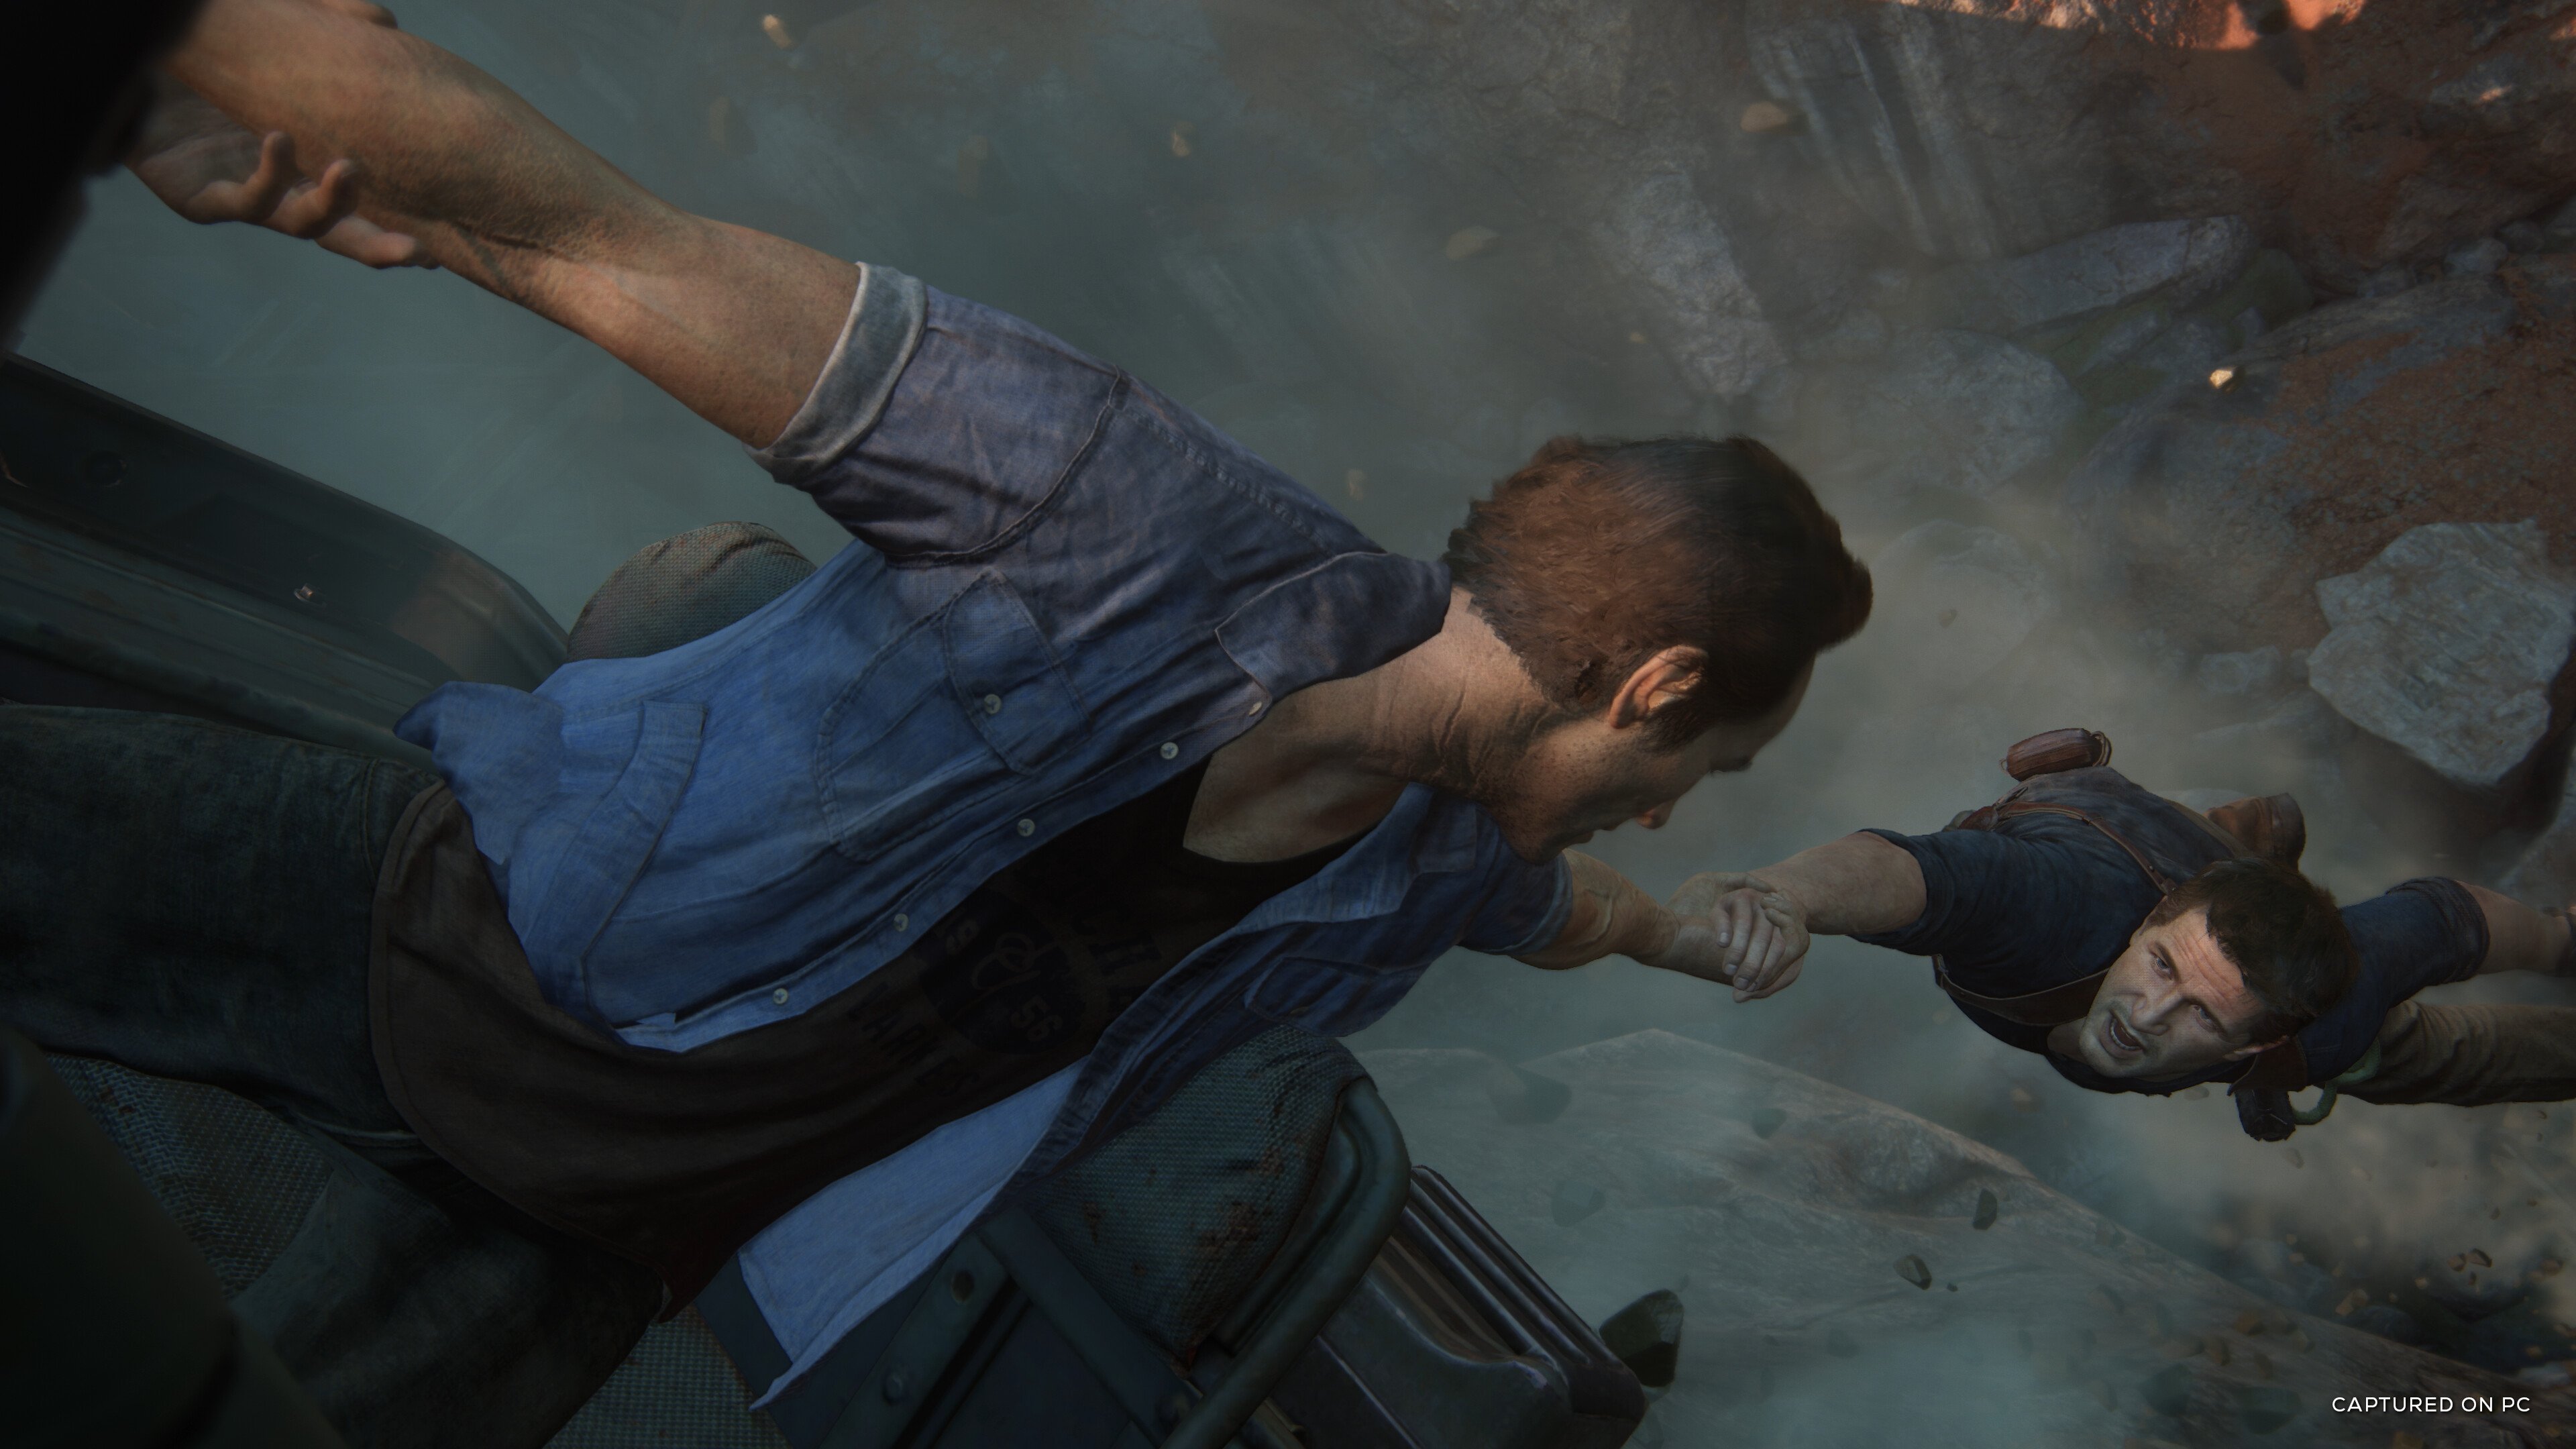 GAMES] Crítica – Uncharted 4: A Thief's End